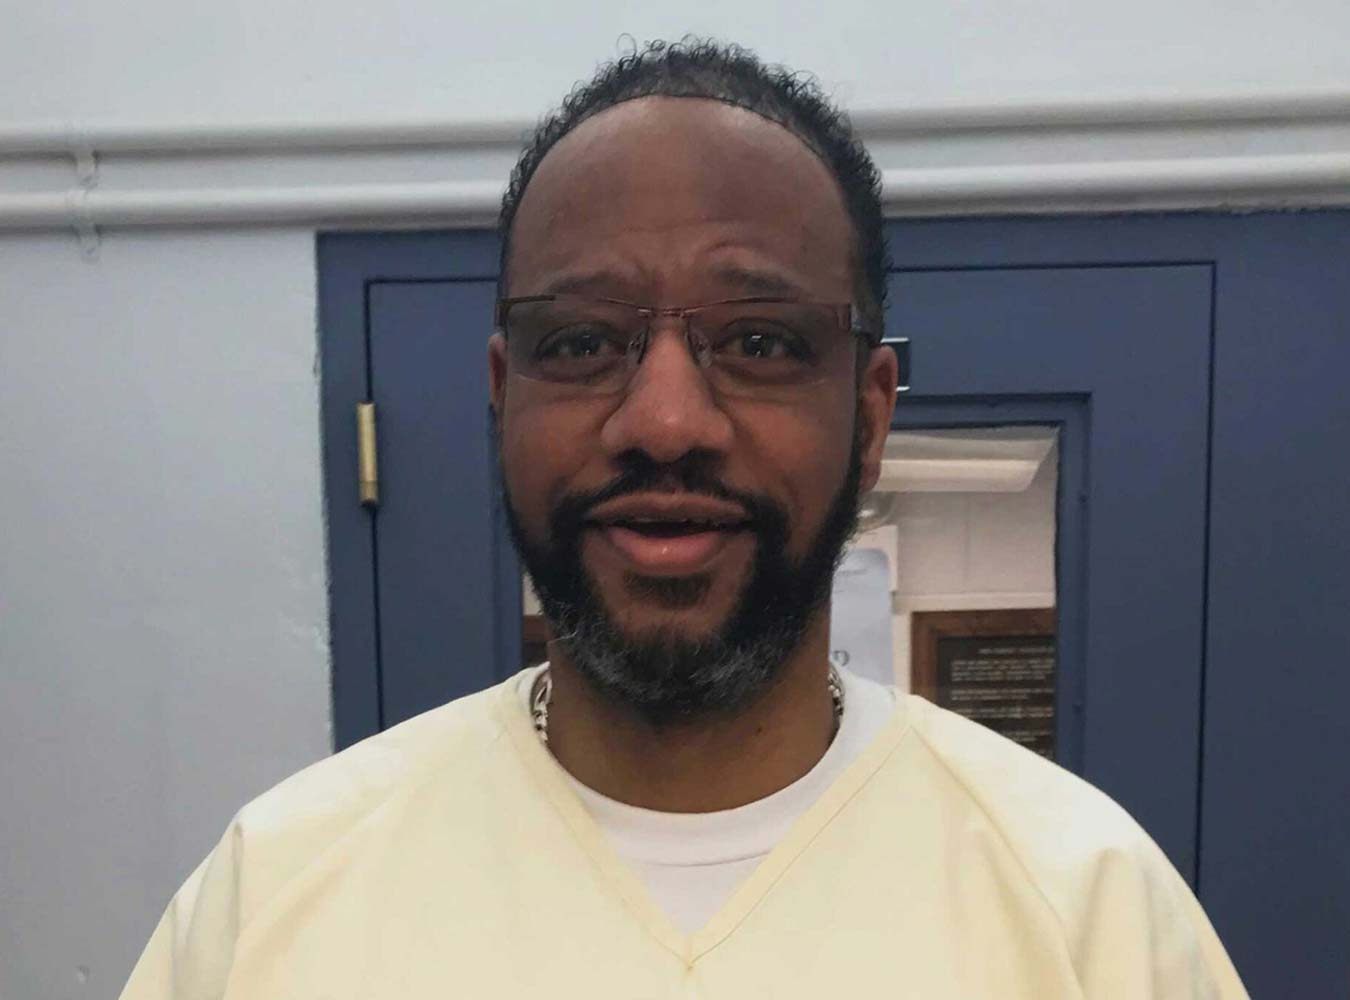 Pervis Payne Will Not Be Executed; DA Concedes He is a Person with Intellectual Disability